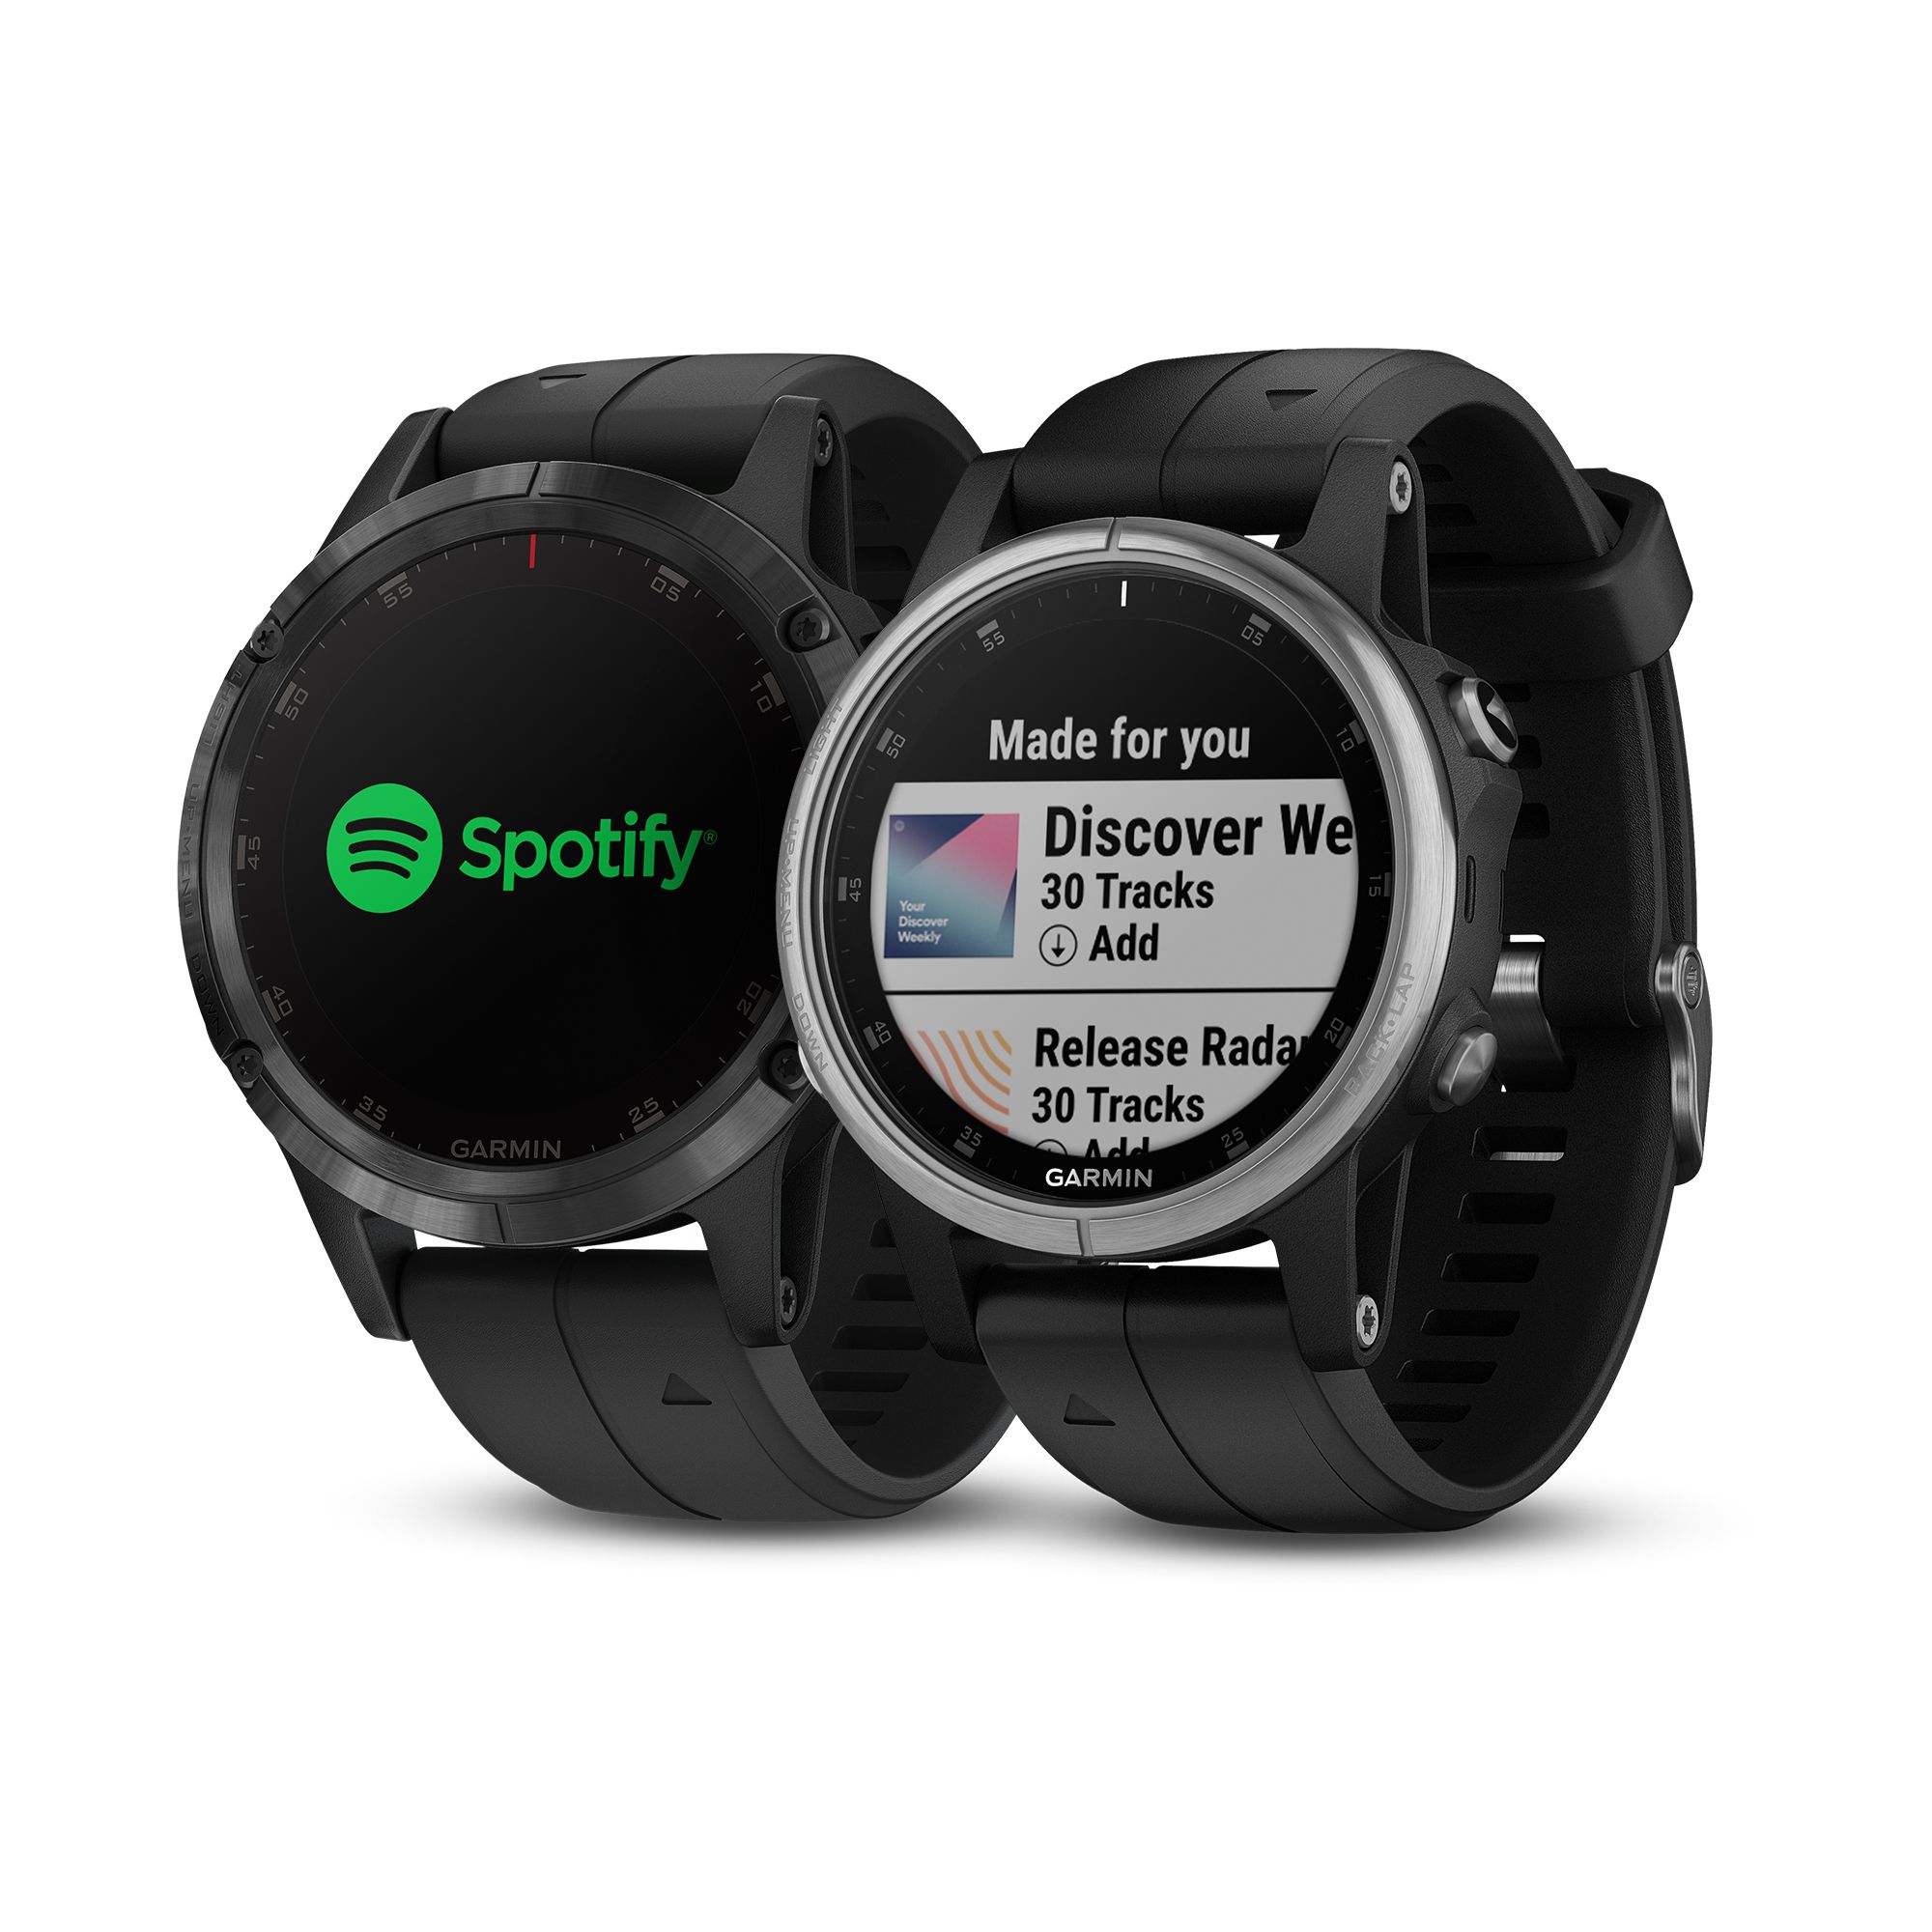 Garmin's Top GPS Watch, the Fenix 5 Plus, Can Now Play Music From